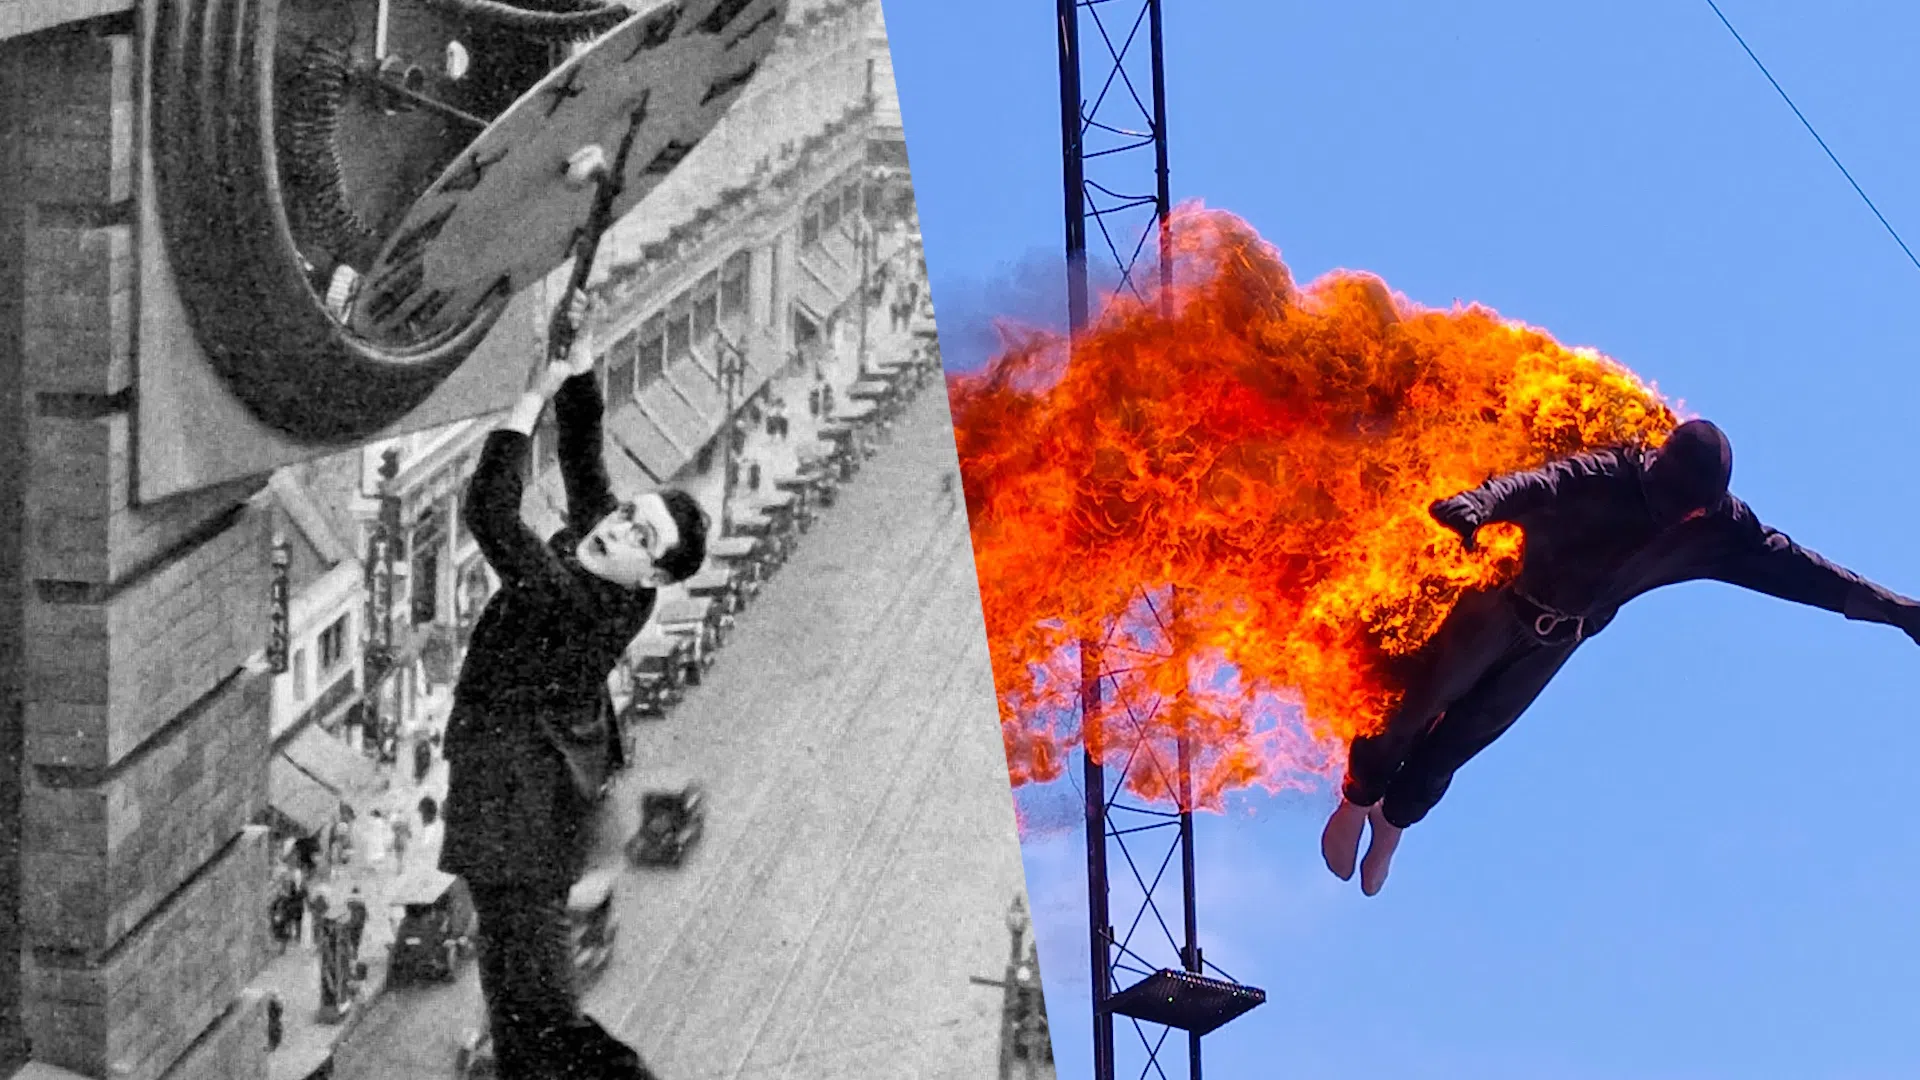 history of stuntworkers